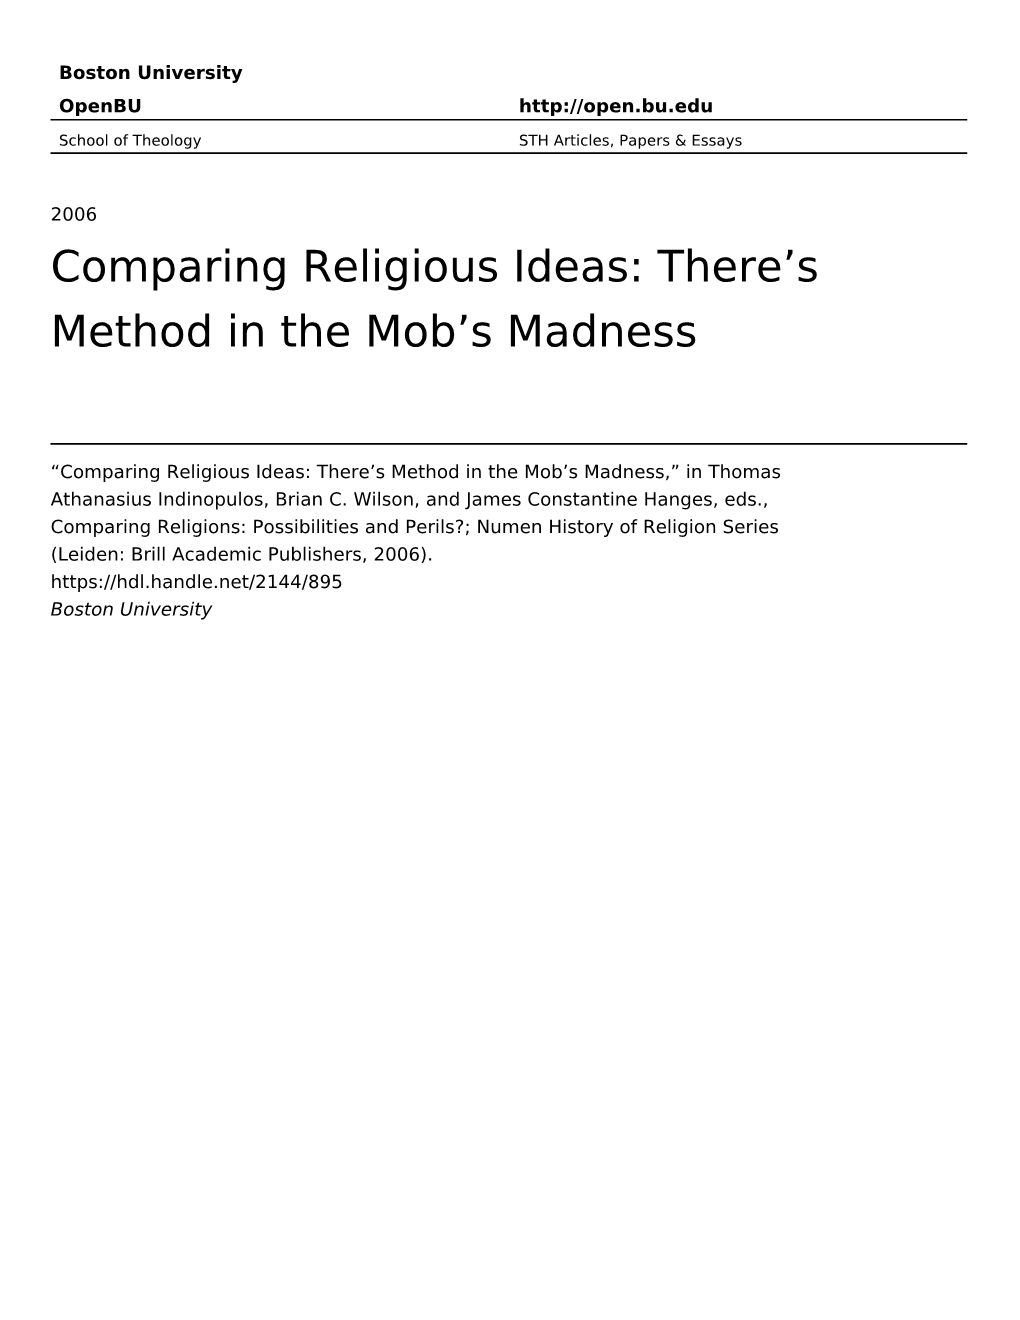 Comparing Religious Ideas: There's Method in the Mob's Madness